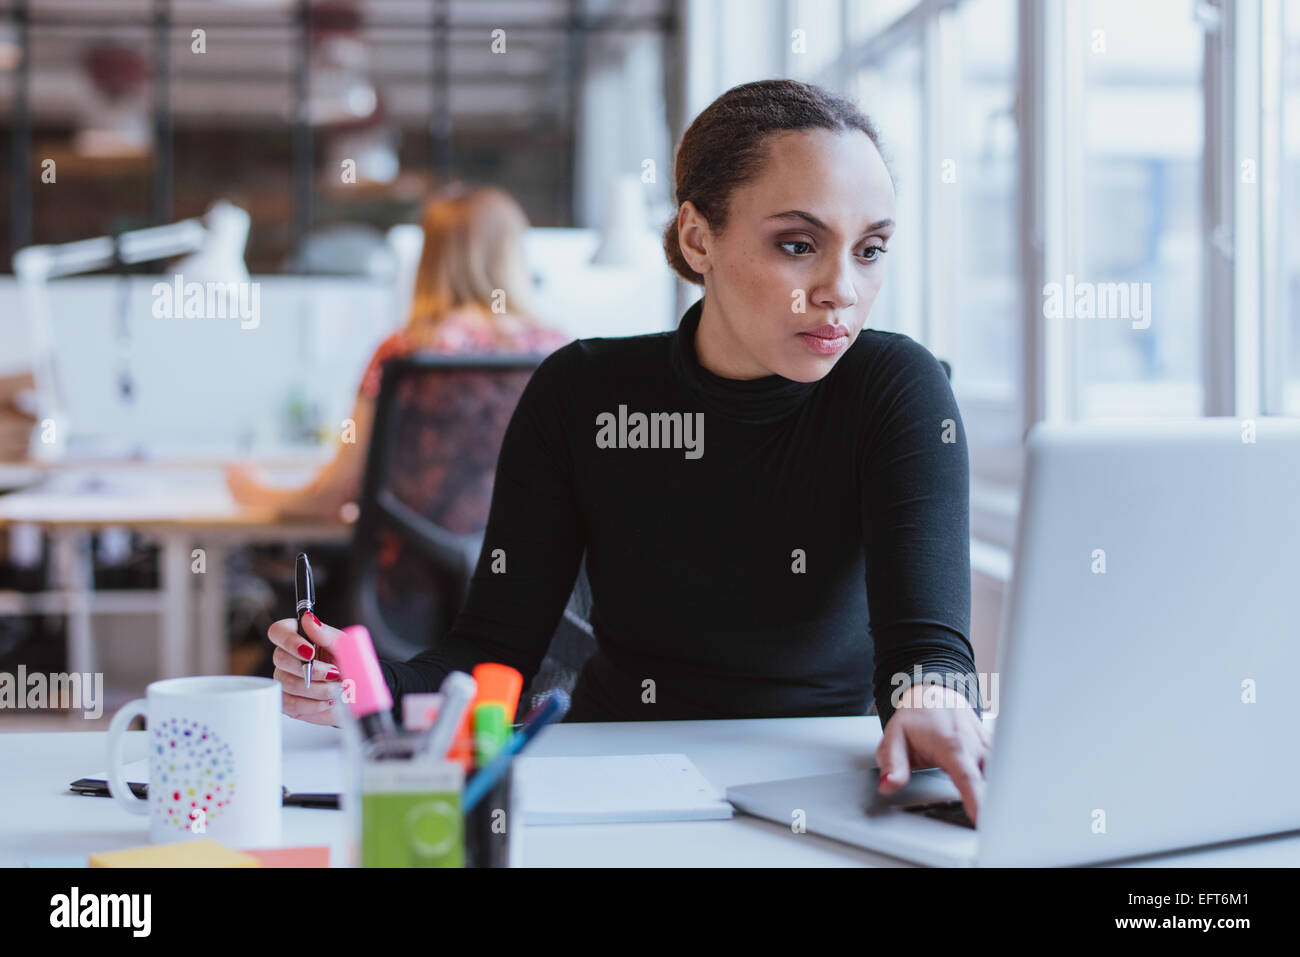 Image of young woman working on laptop while sitting at her desk in modern office. African female executive at work. Stock Photo